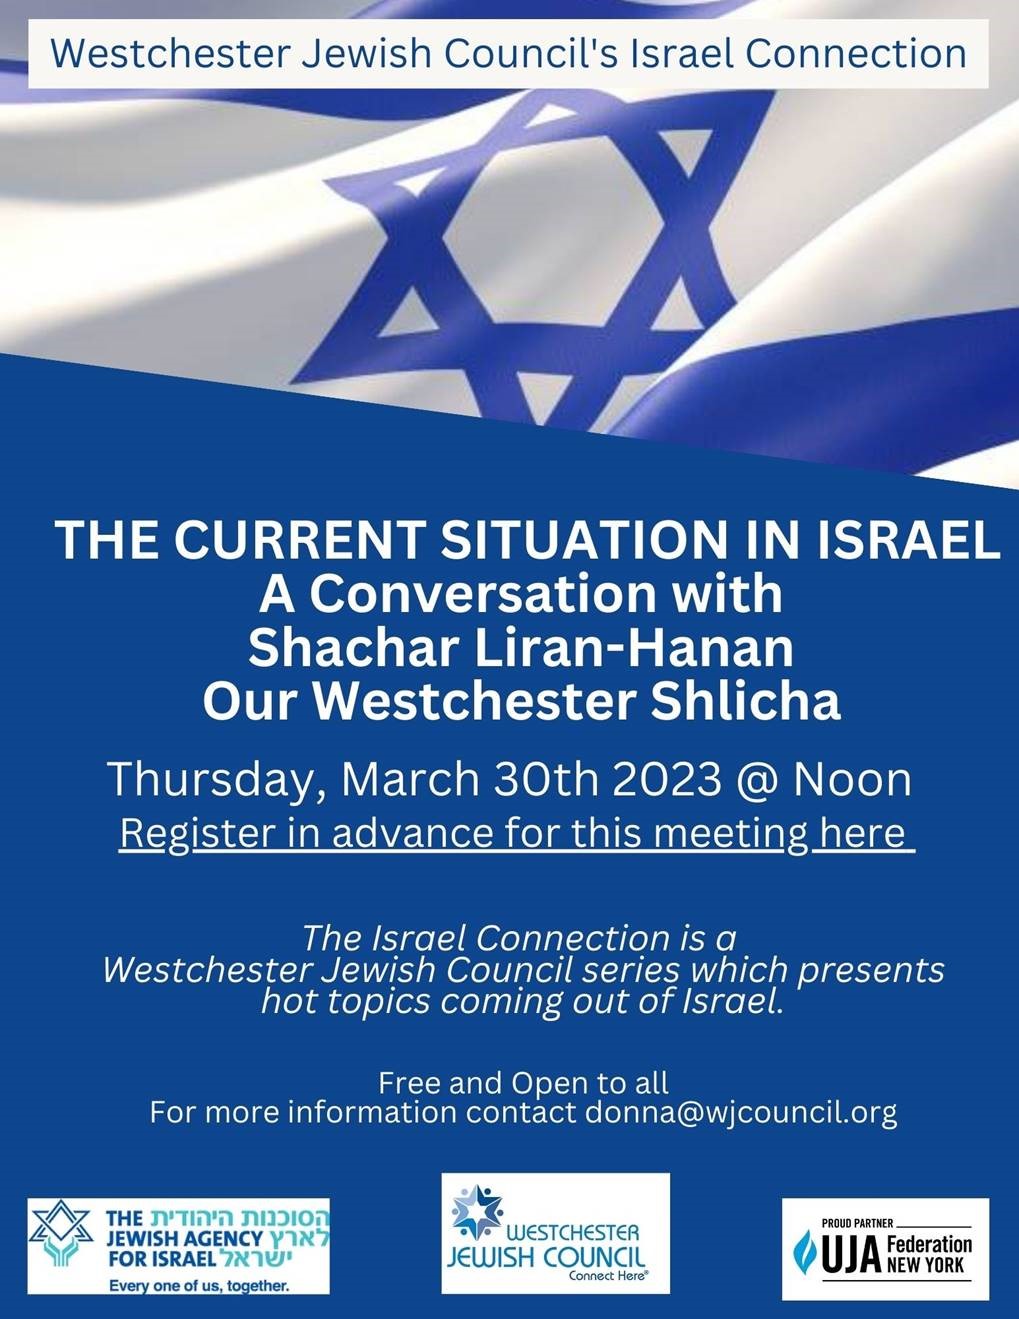 Westchester Jewish Council Israel Connection - The Current Situation in Israel-A Conversation with Shachar Liran-Hanan Our Westchester Shlicha